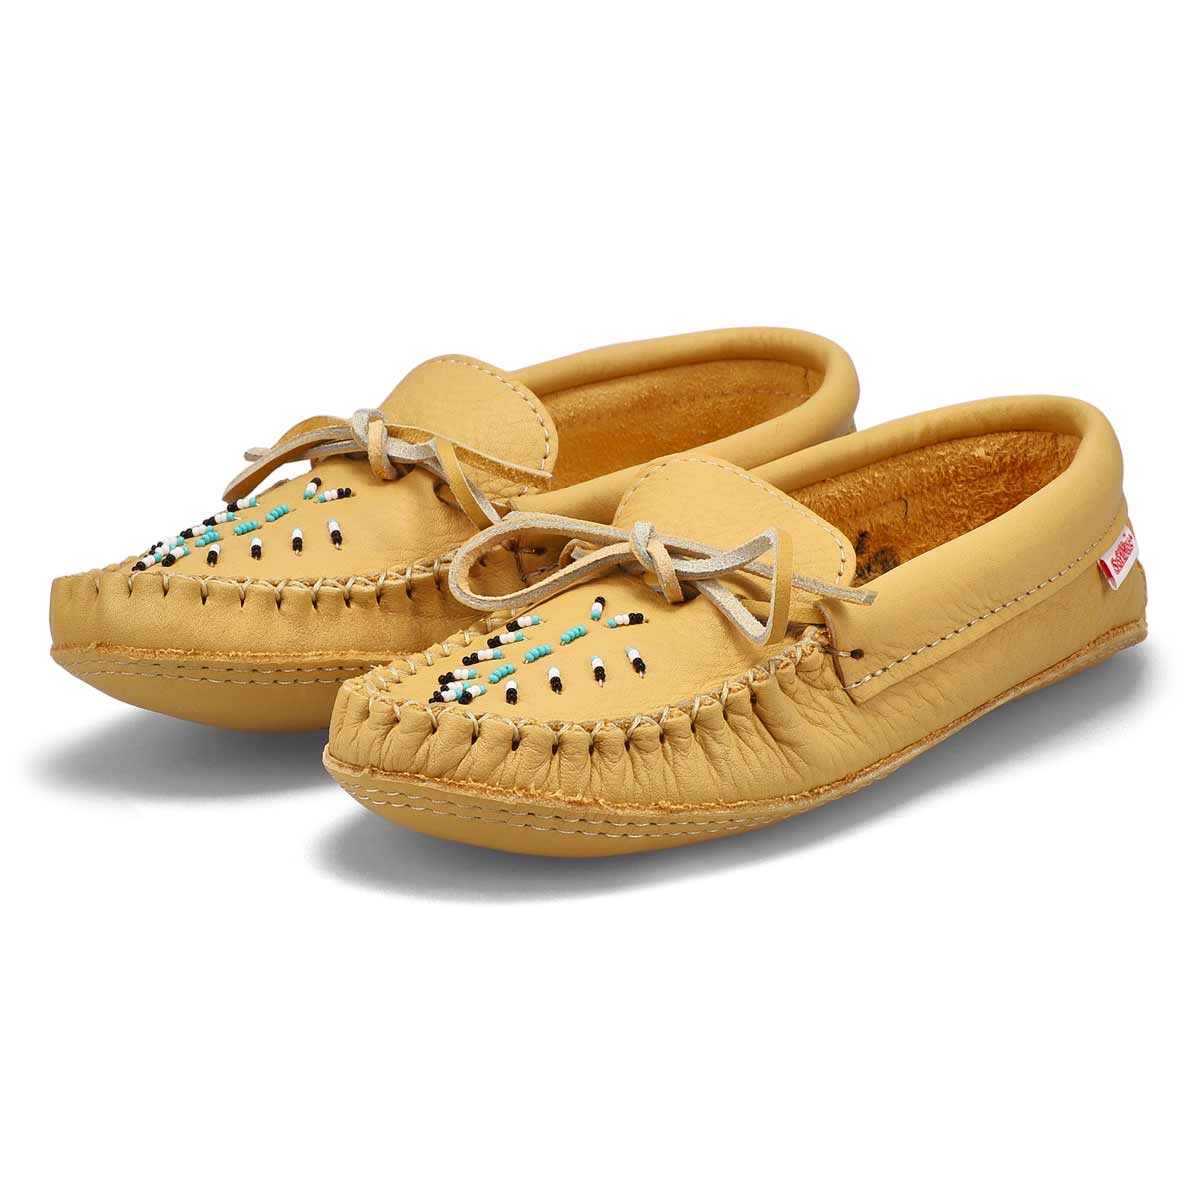 Women's 11526 Moccasin - Natural